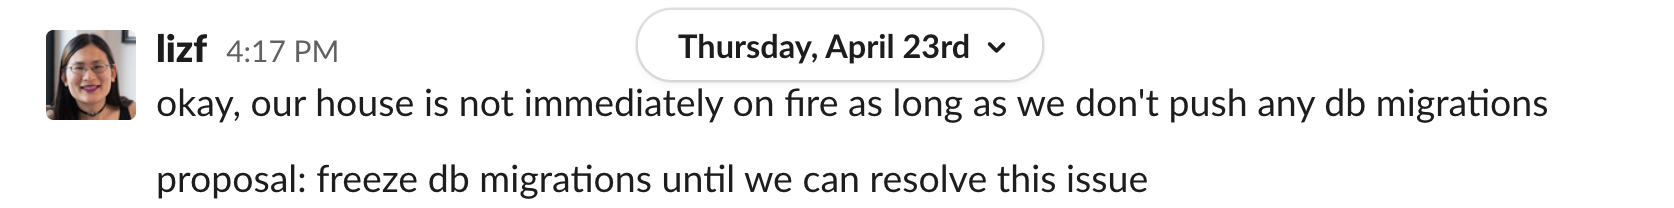 lizf 4:17 PM okay, our house is not immediately on fire as long as we don't push any db migrations. proposal: freeze db migrations until we can resolve this issue